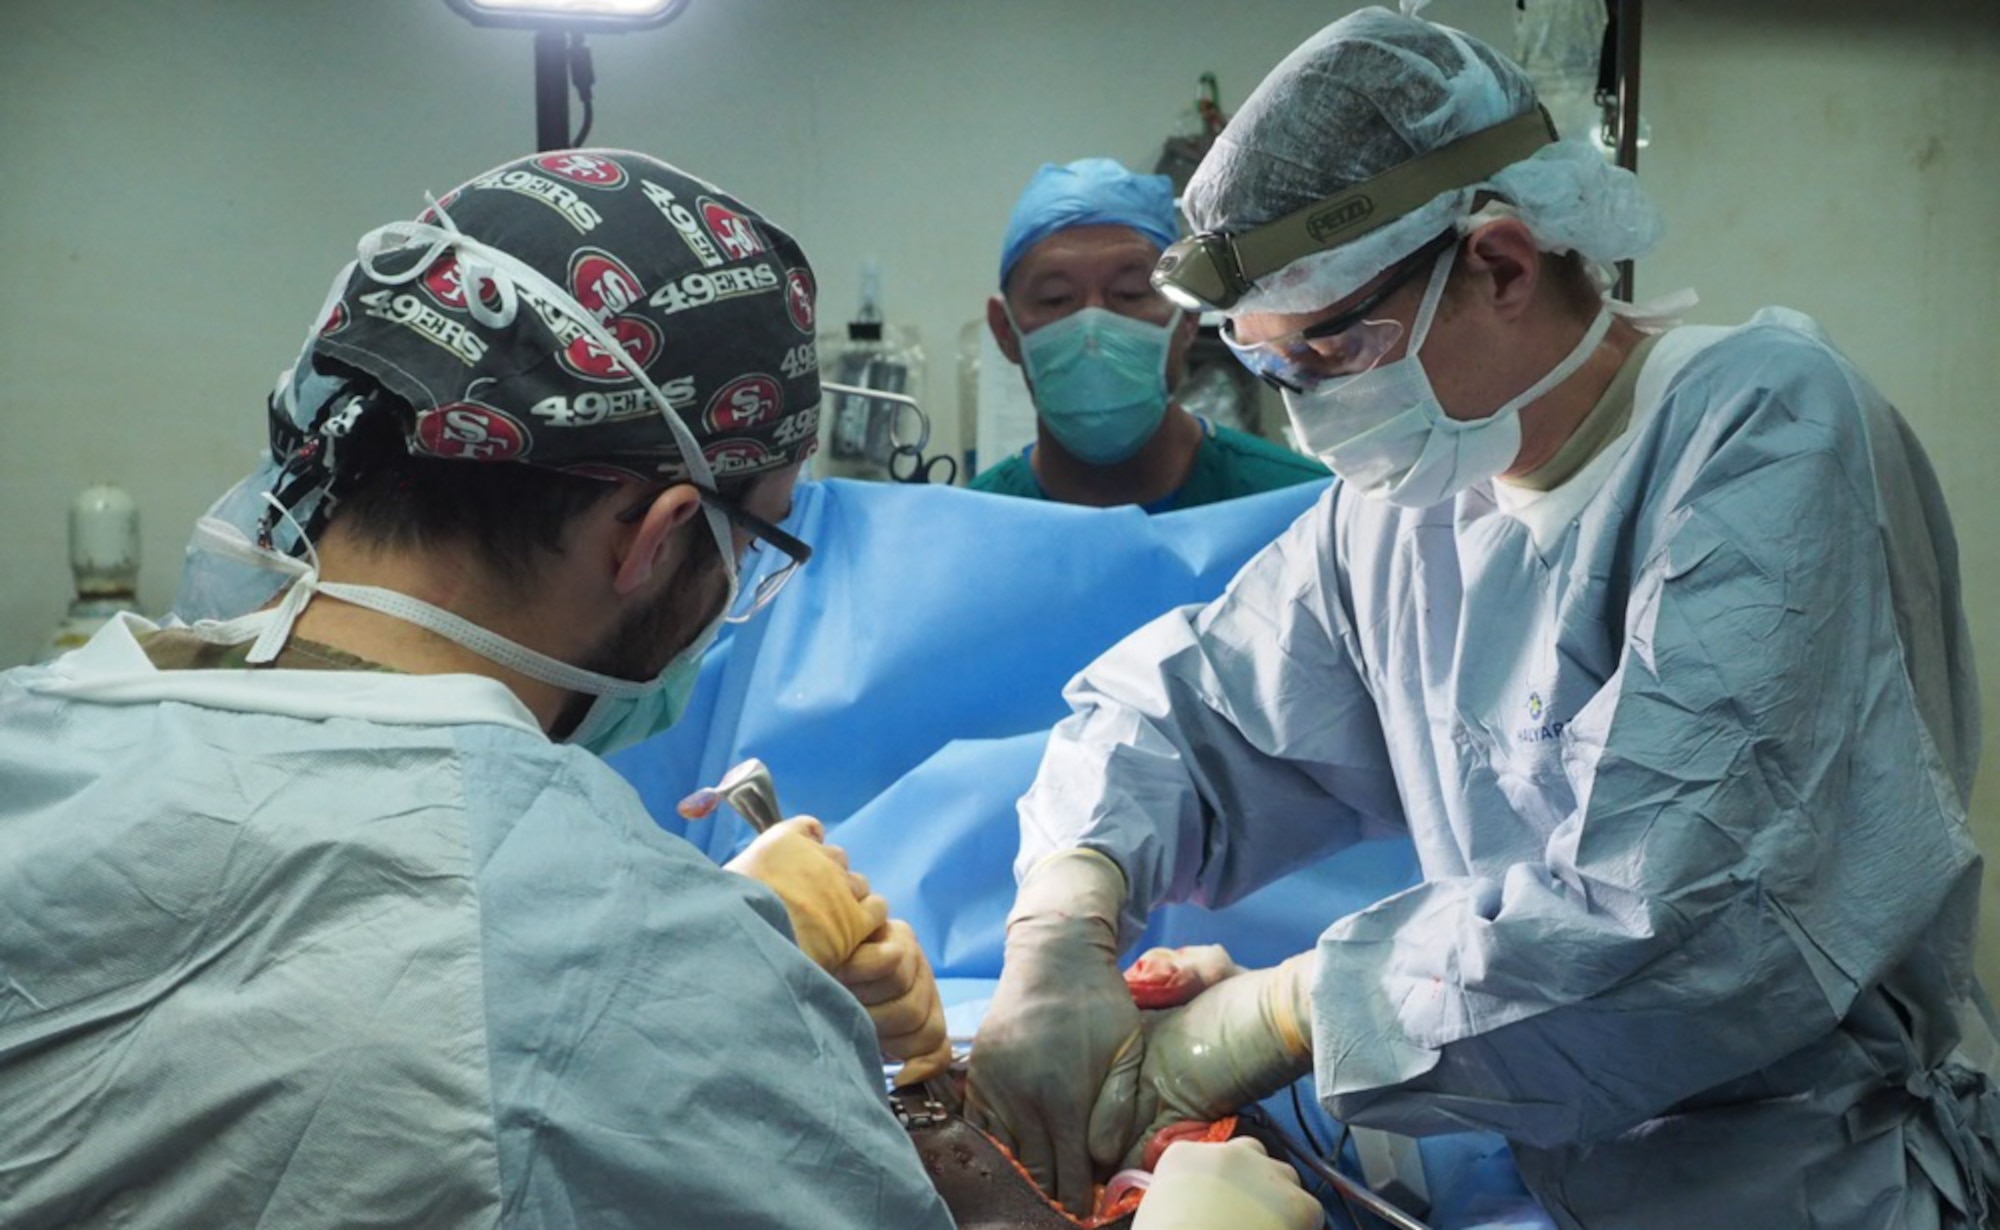 From surgical to pandemic response